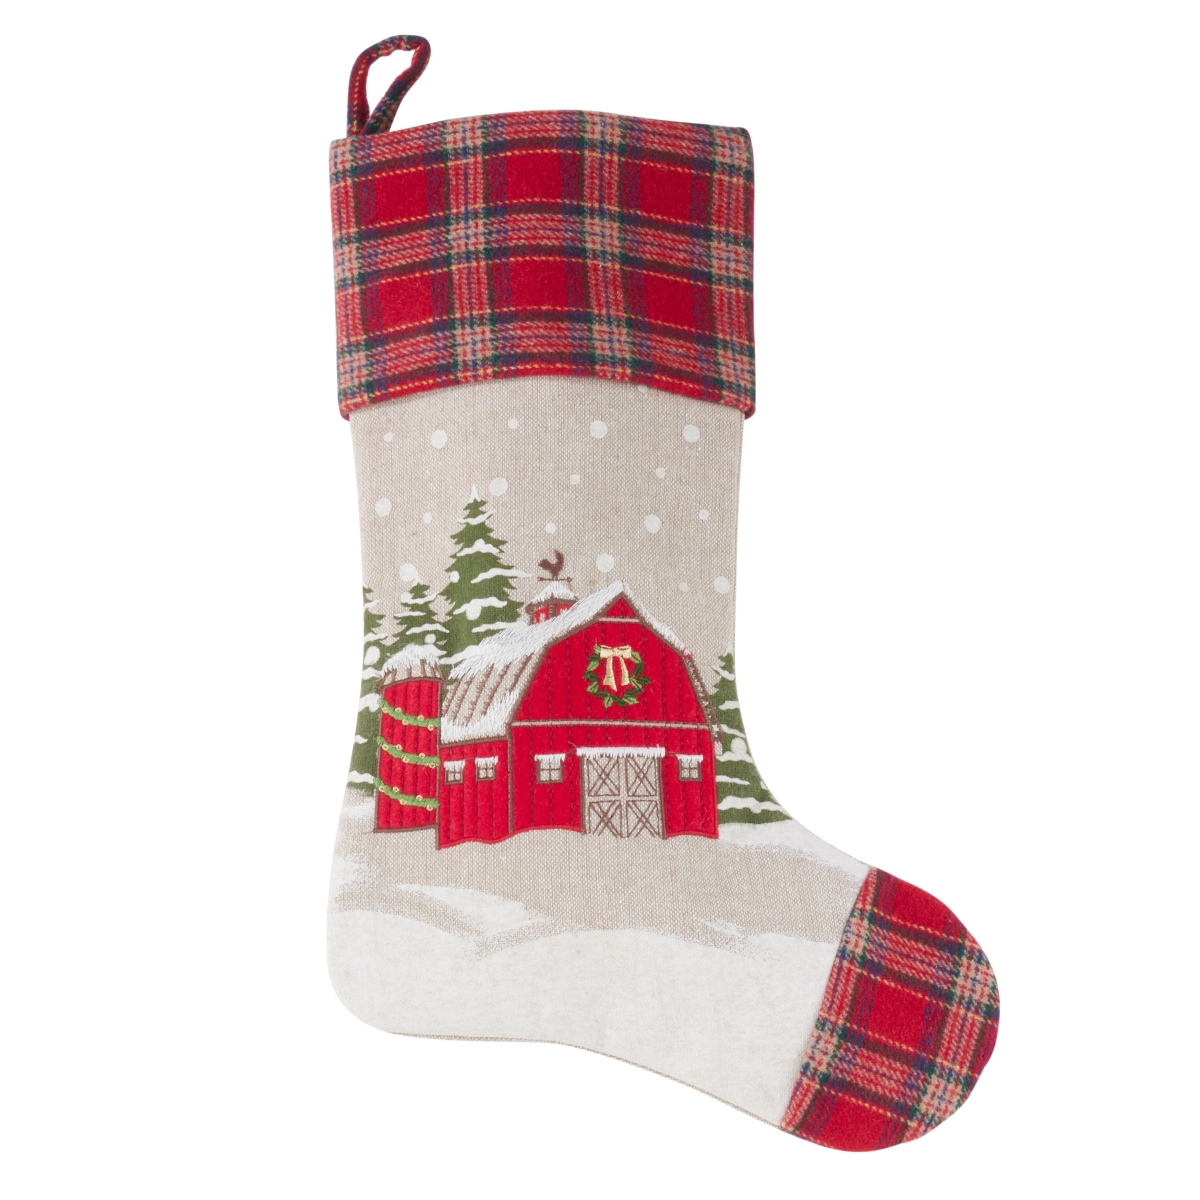 UPC 789323339881 product image for 7753.M1620 16 x 20 in. Christmas Stocking with Holiday Barn Design & Red Plaid B | upcitemdb.com